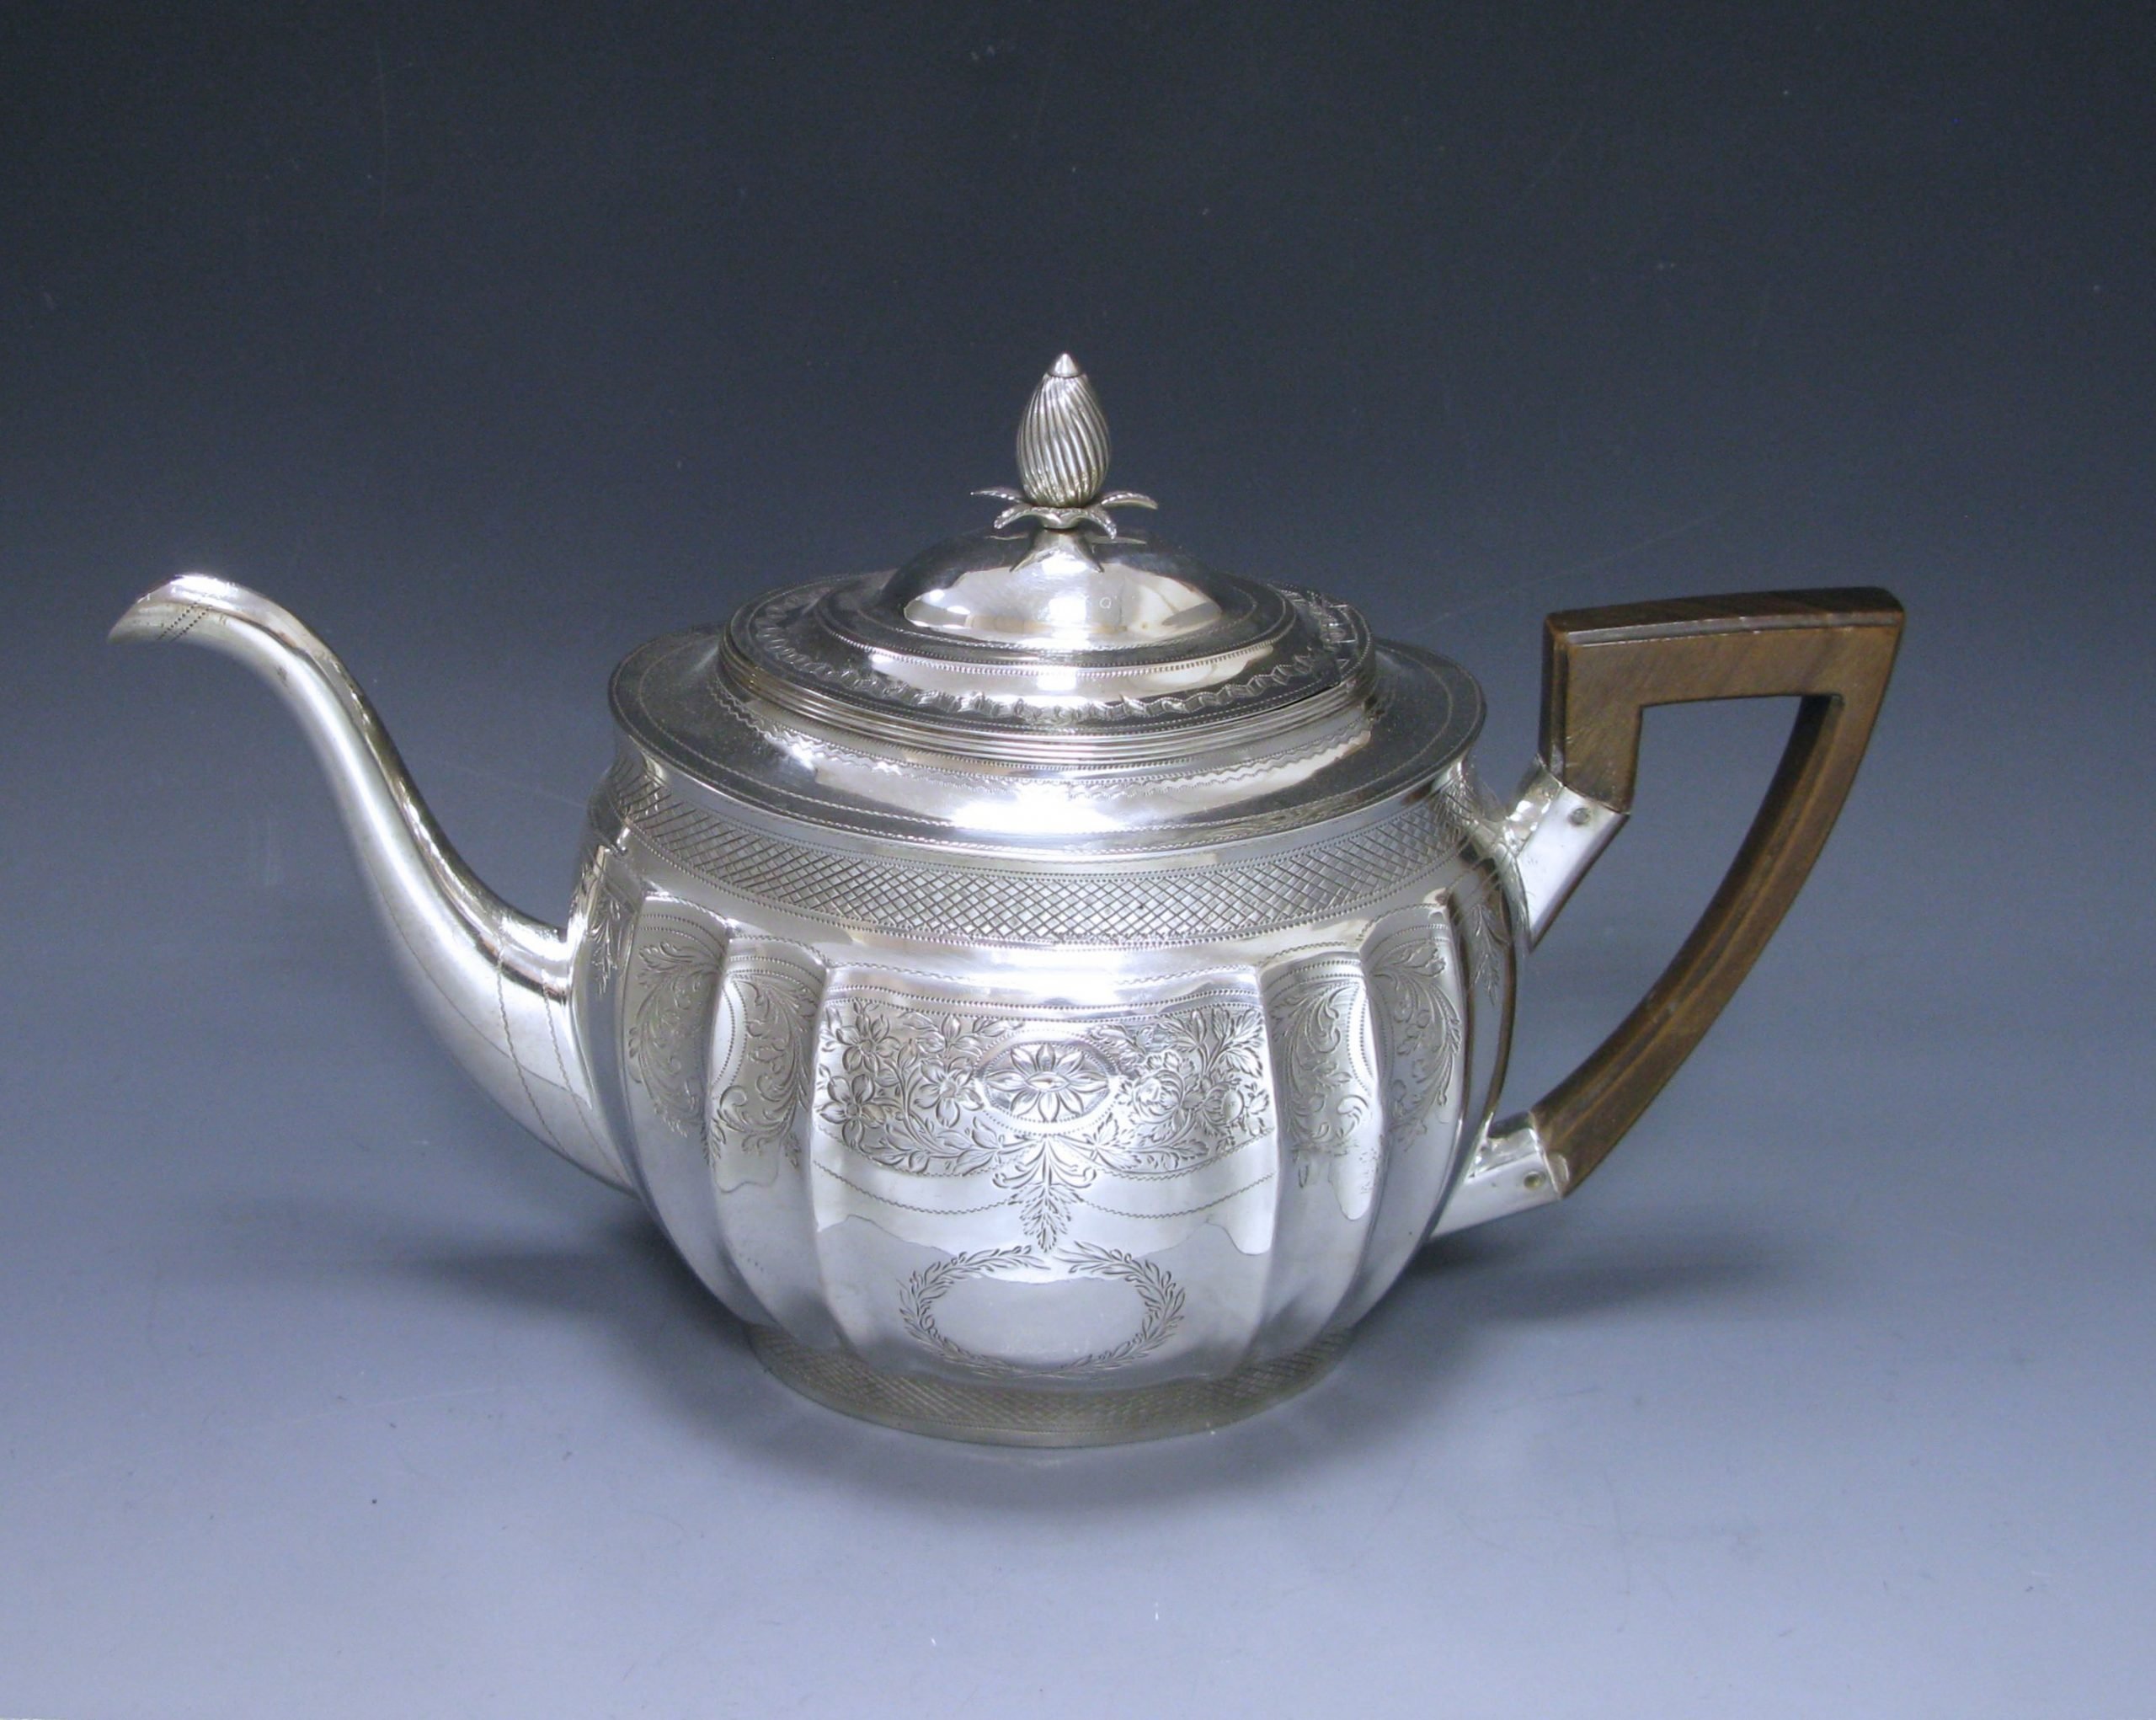 George III Antique Silver Teapot 1